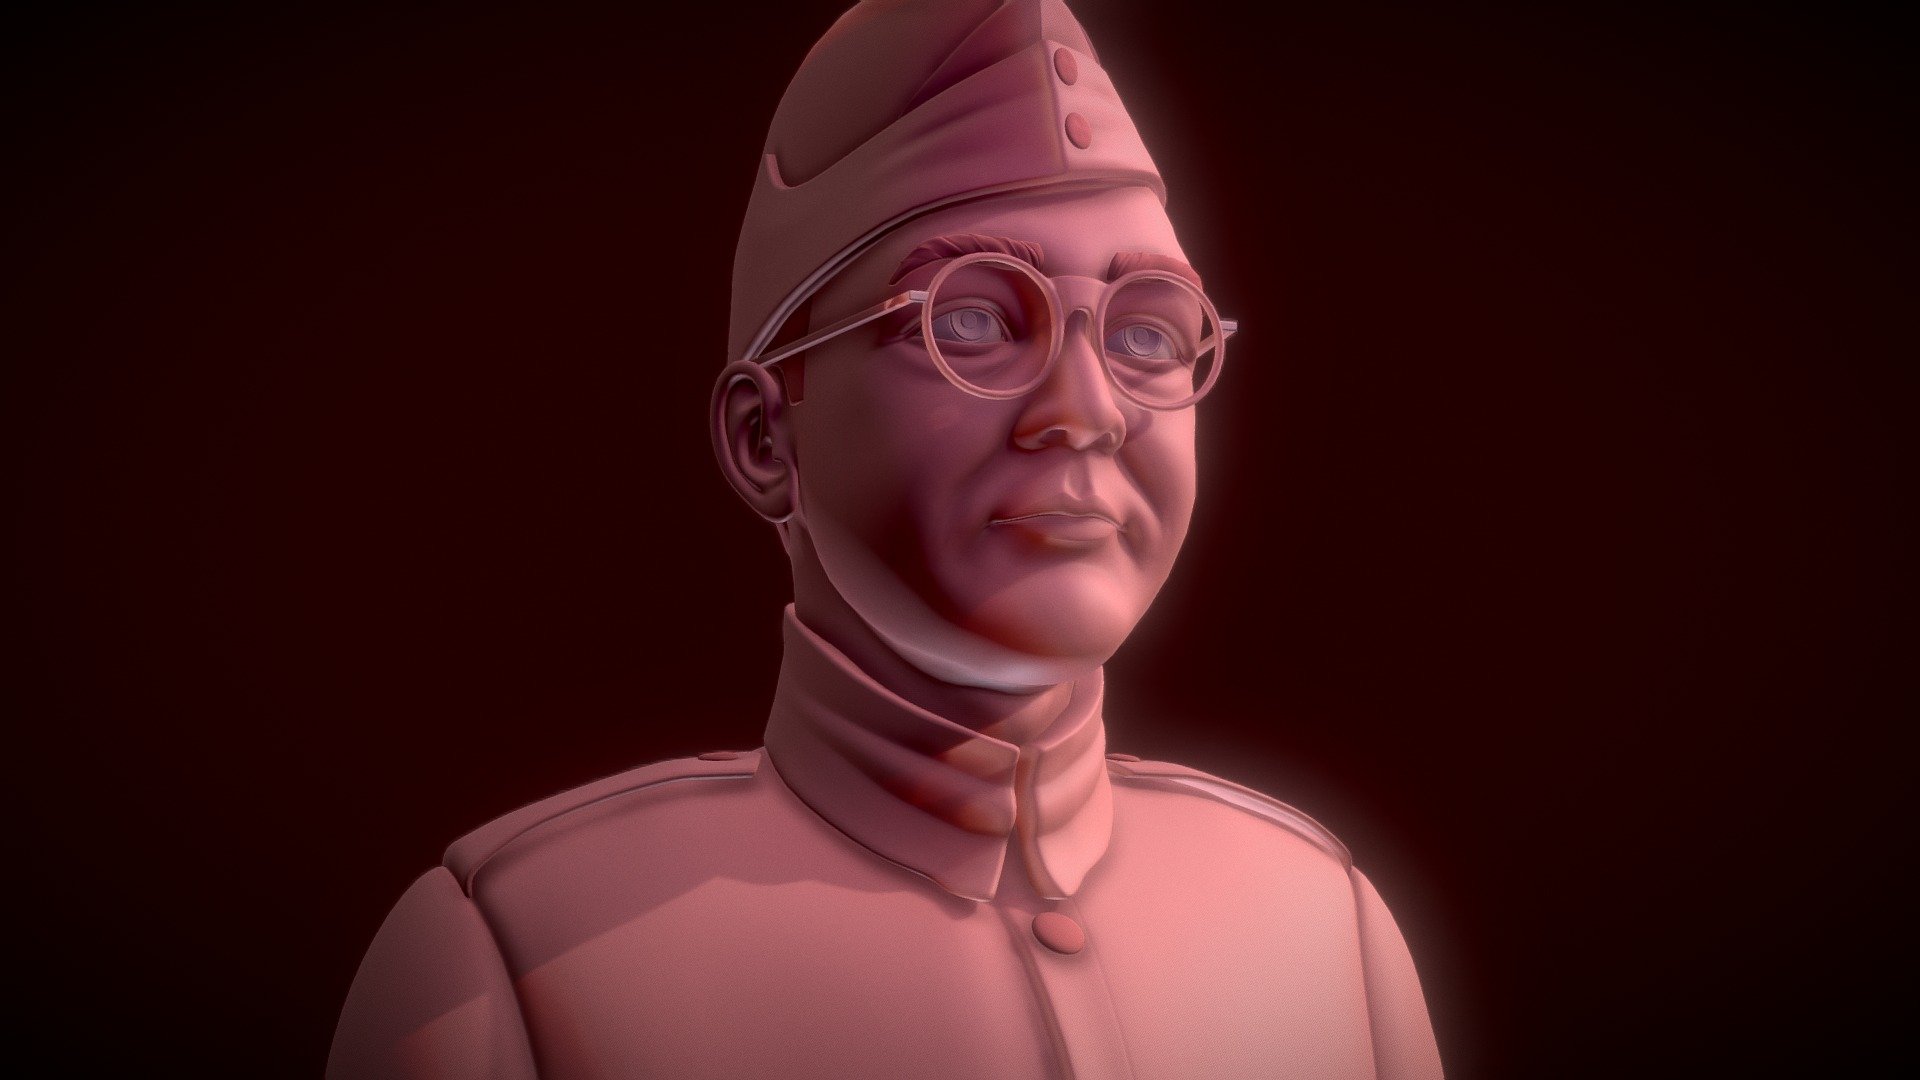 Subhas Chandra Bose was an Indian nationalist whose defiant patriotism made him a hero in India.
He also called Netaji is known for his role in India's independence movement. A participant of the noncooperation movement and a leader of the Indian National Congress, he was part of the more militant wing and known for his advocacy of socialist policies.

More Information about him.
https://en.wikipedia.org/wiki/Subhas_Chandra_Bose

Thanks - SUBHASH CHANDRA BOSE - Buy Royalty Free 3D model by GOFOR3D 3d model